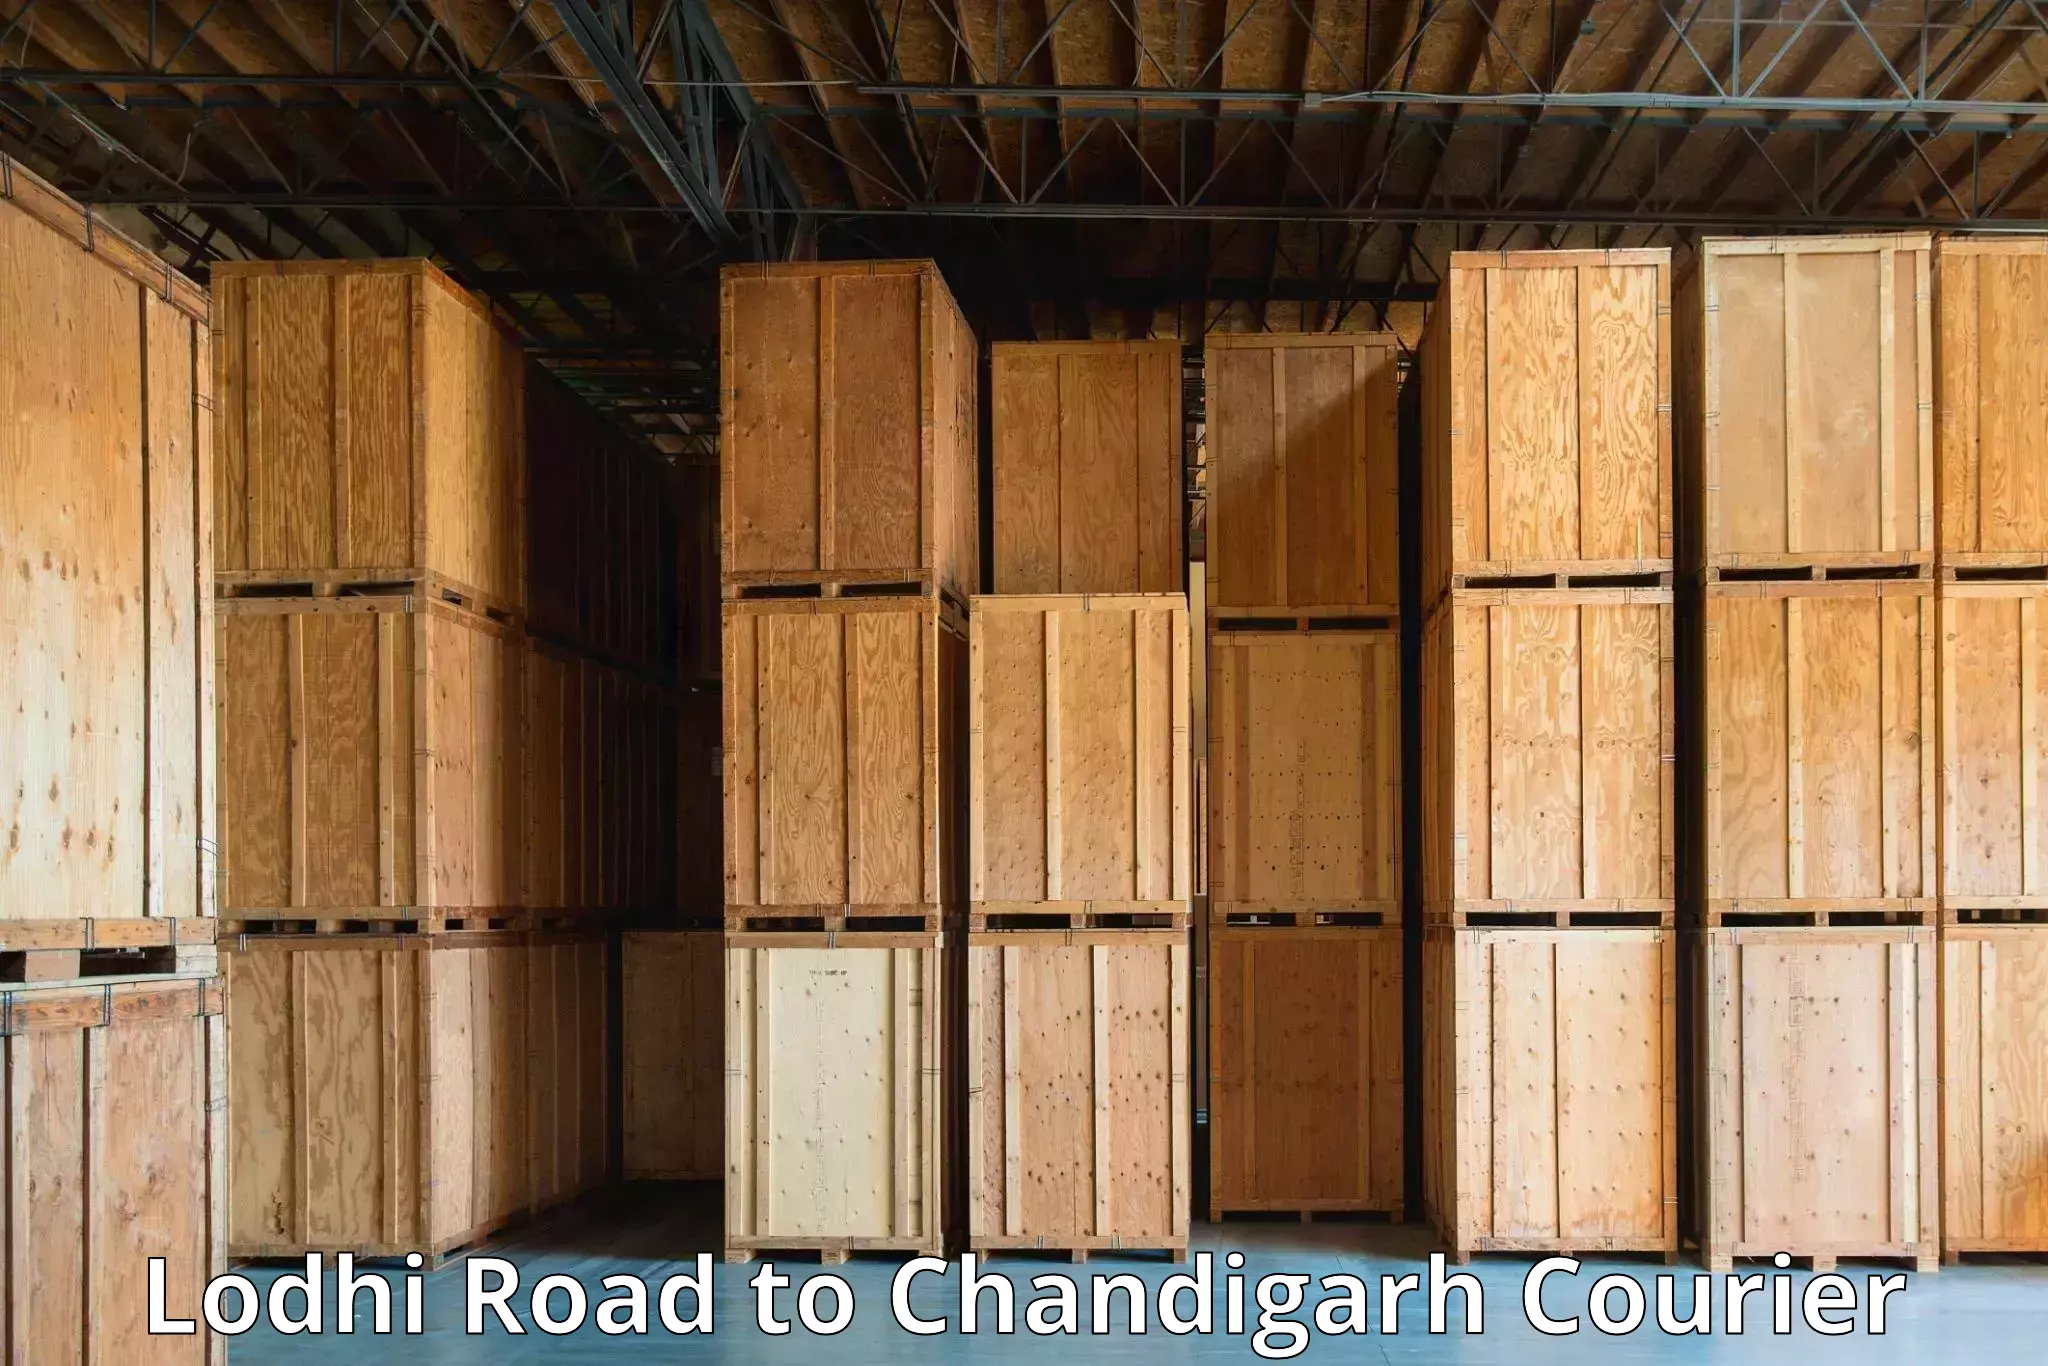 High-priority parcel service Lodhi Road to Chandigarh